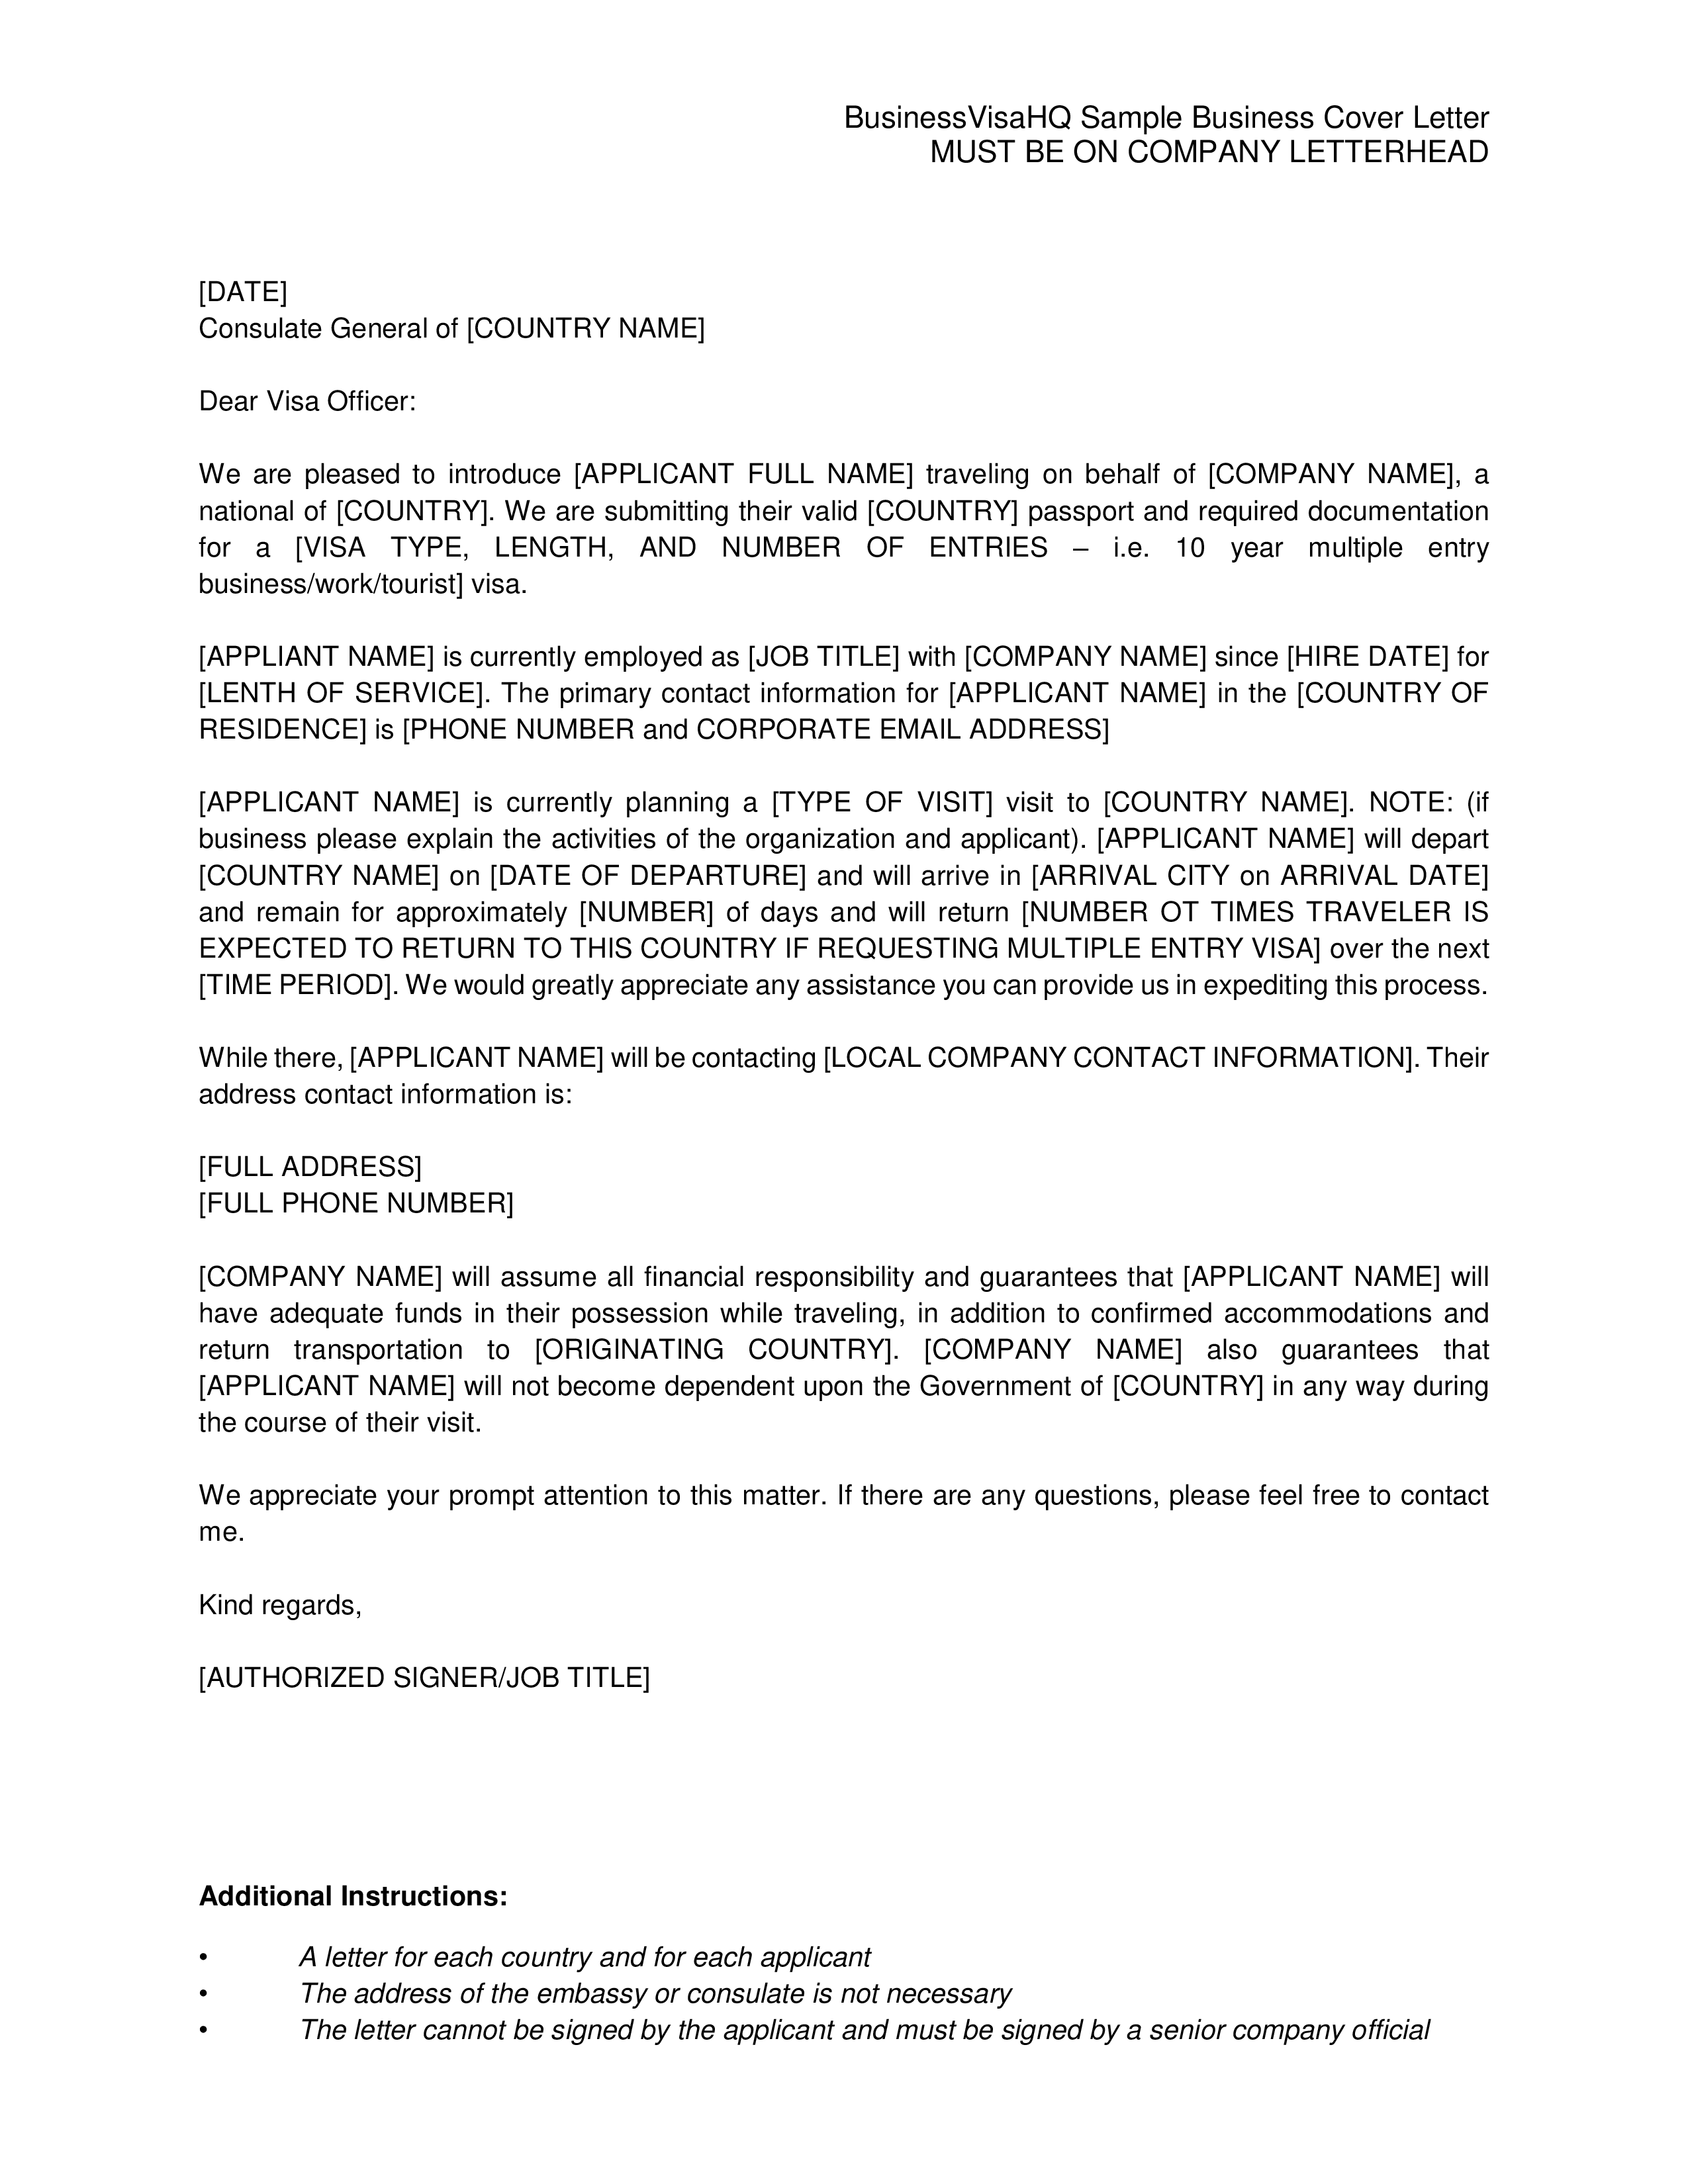 Kostenloses Sample Business Cover Letter